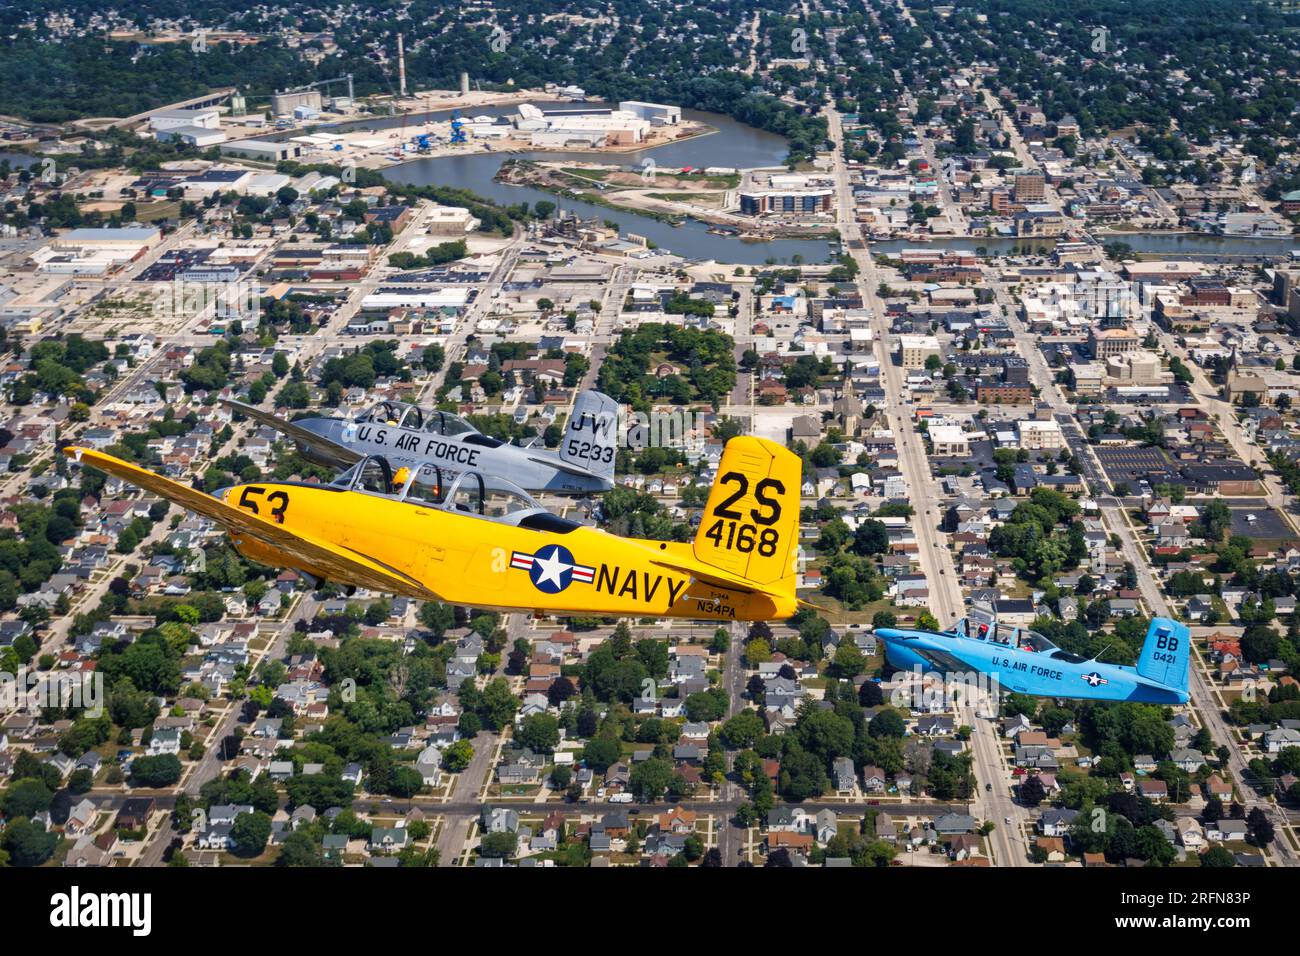 Three Beechcraft T-34 Mentors in formation over Manitowoc, Wisconsin approaching Lake Michigan. Stock Photo